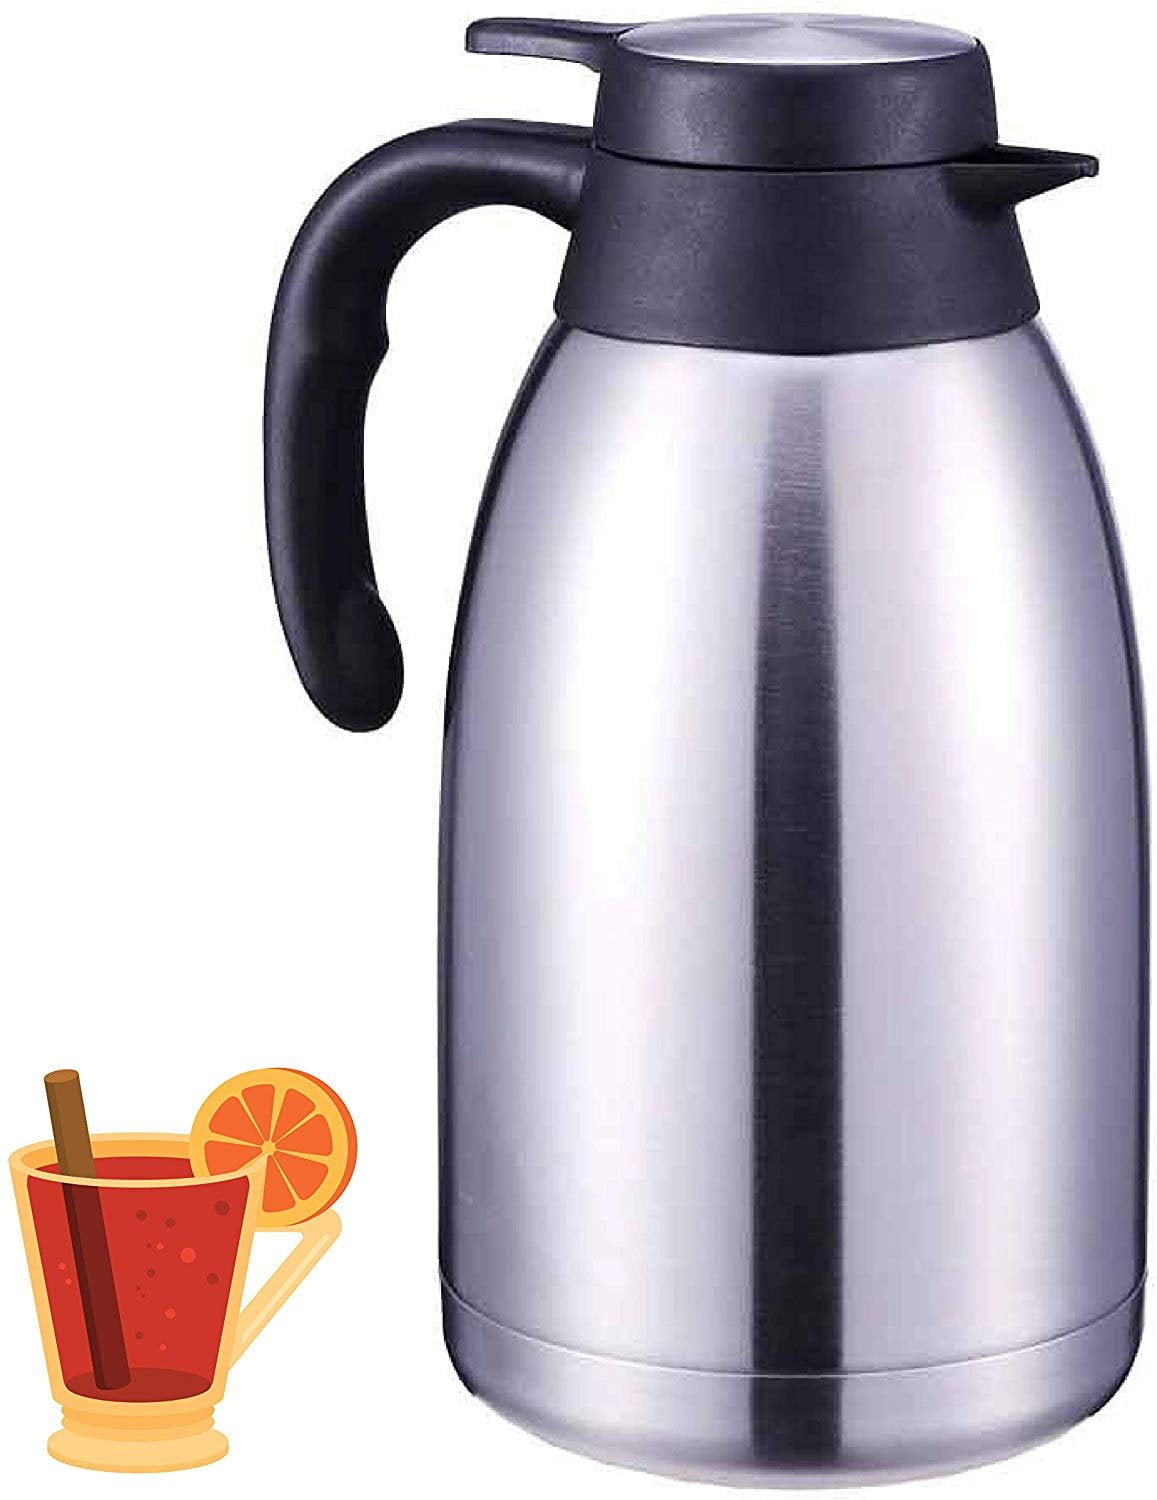 Double Walled Vacuum Flask and Coffee Dispenser Water 1.5 Liter Tea 12 Hour Heat Retention CozyKit Stainless Steel Thermal Coffee Carafe 